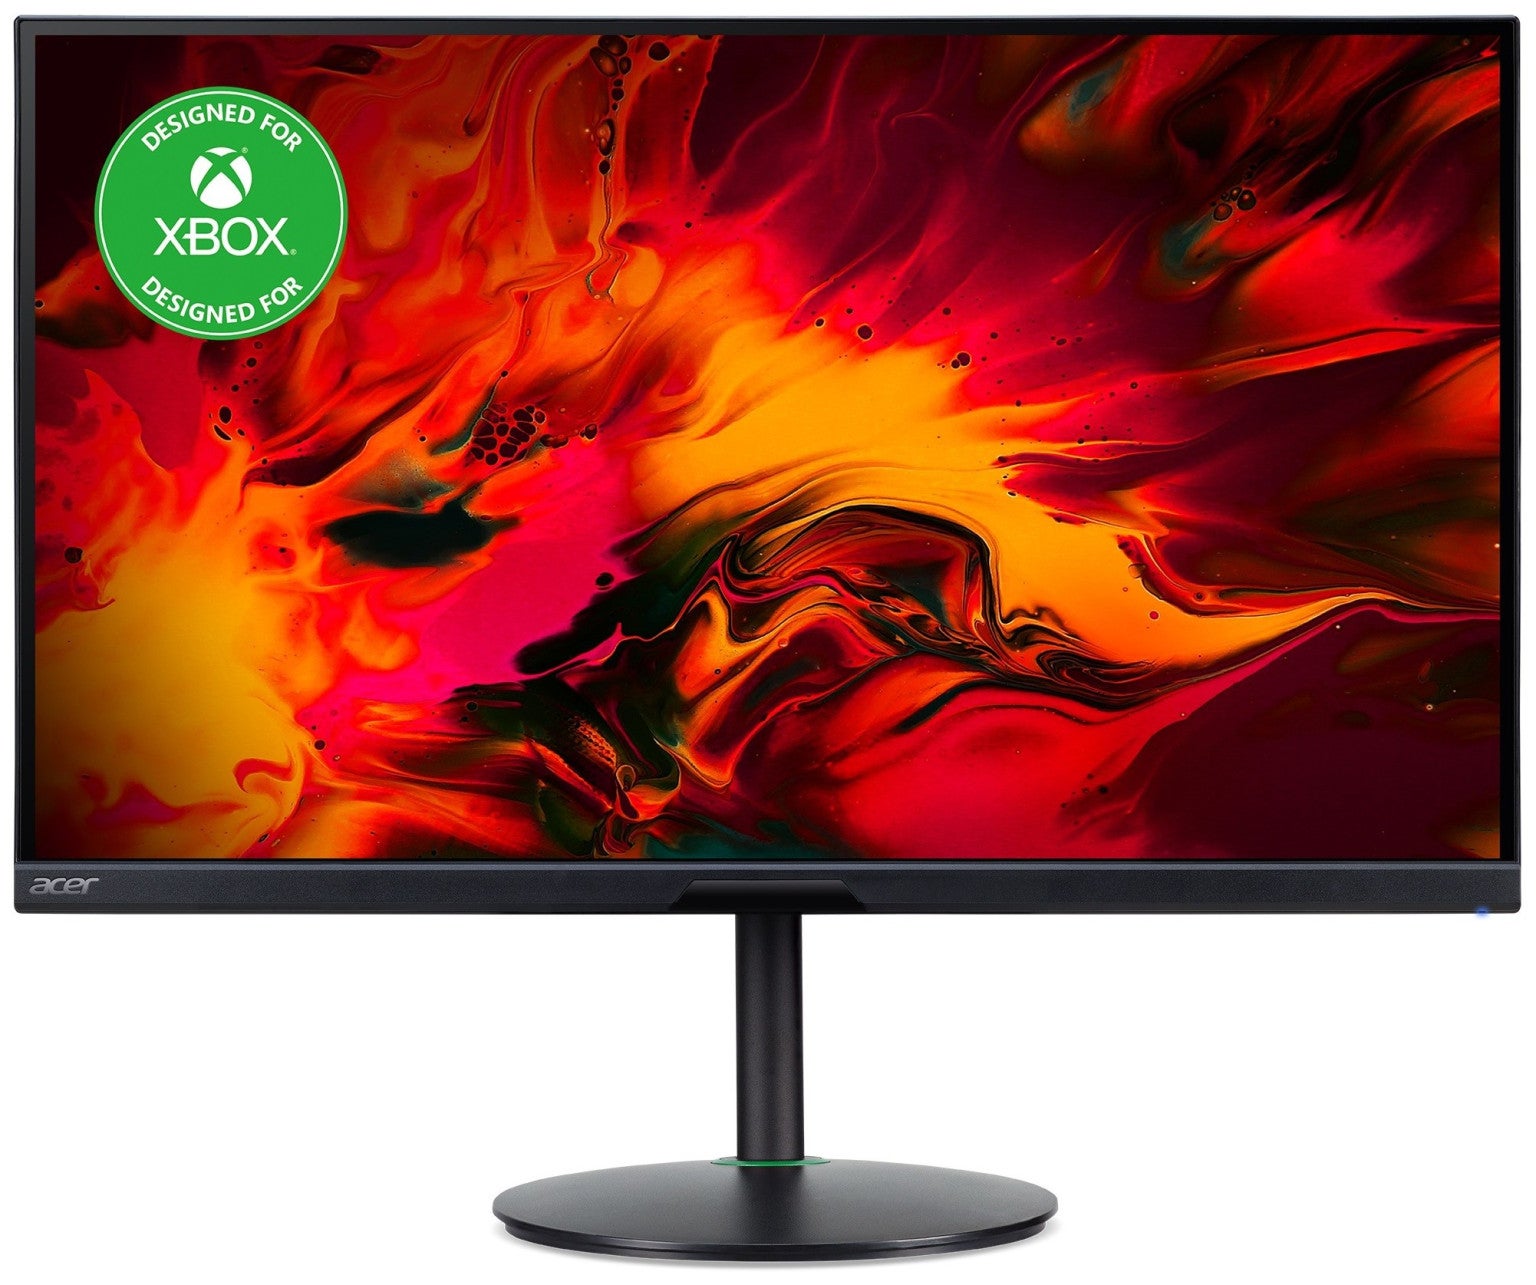 Acer's 28-onch Xbox Edition Gaming Monitor XV282K KV (Image: Acer)